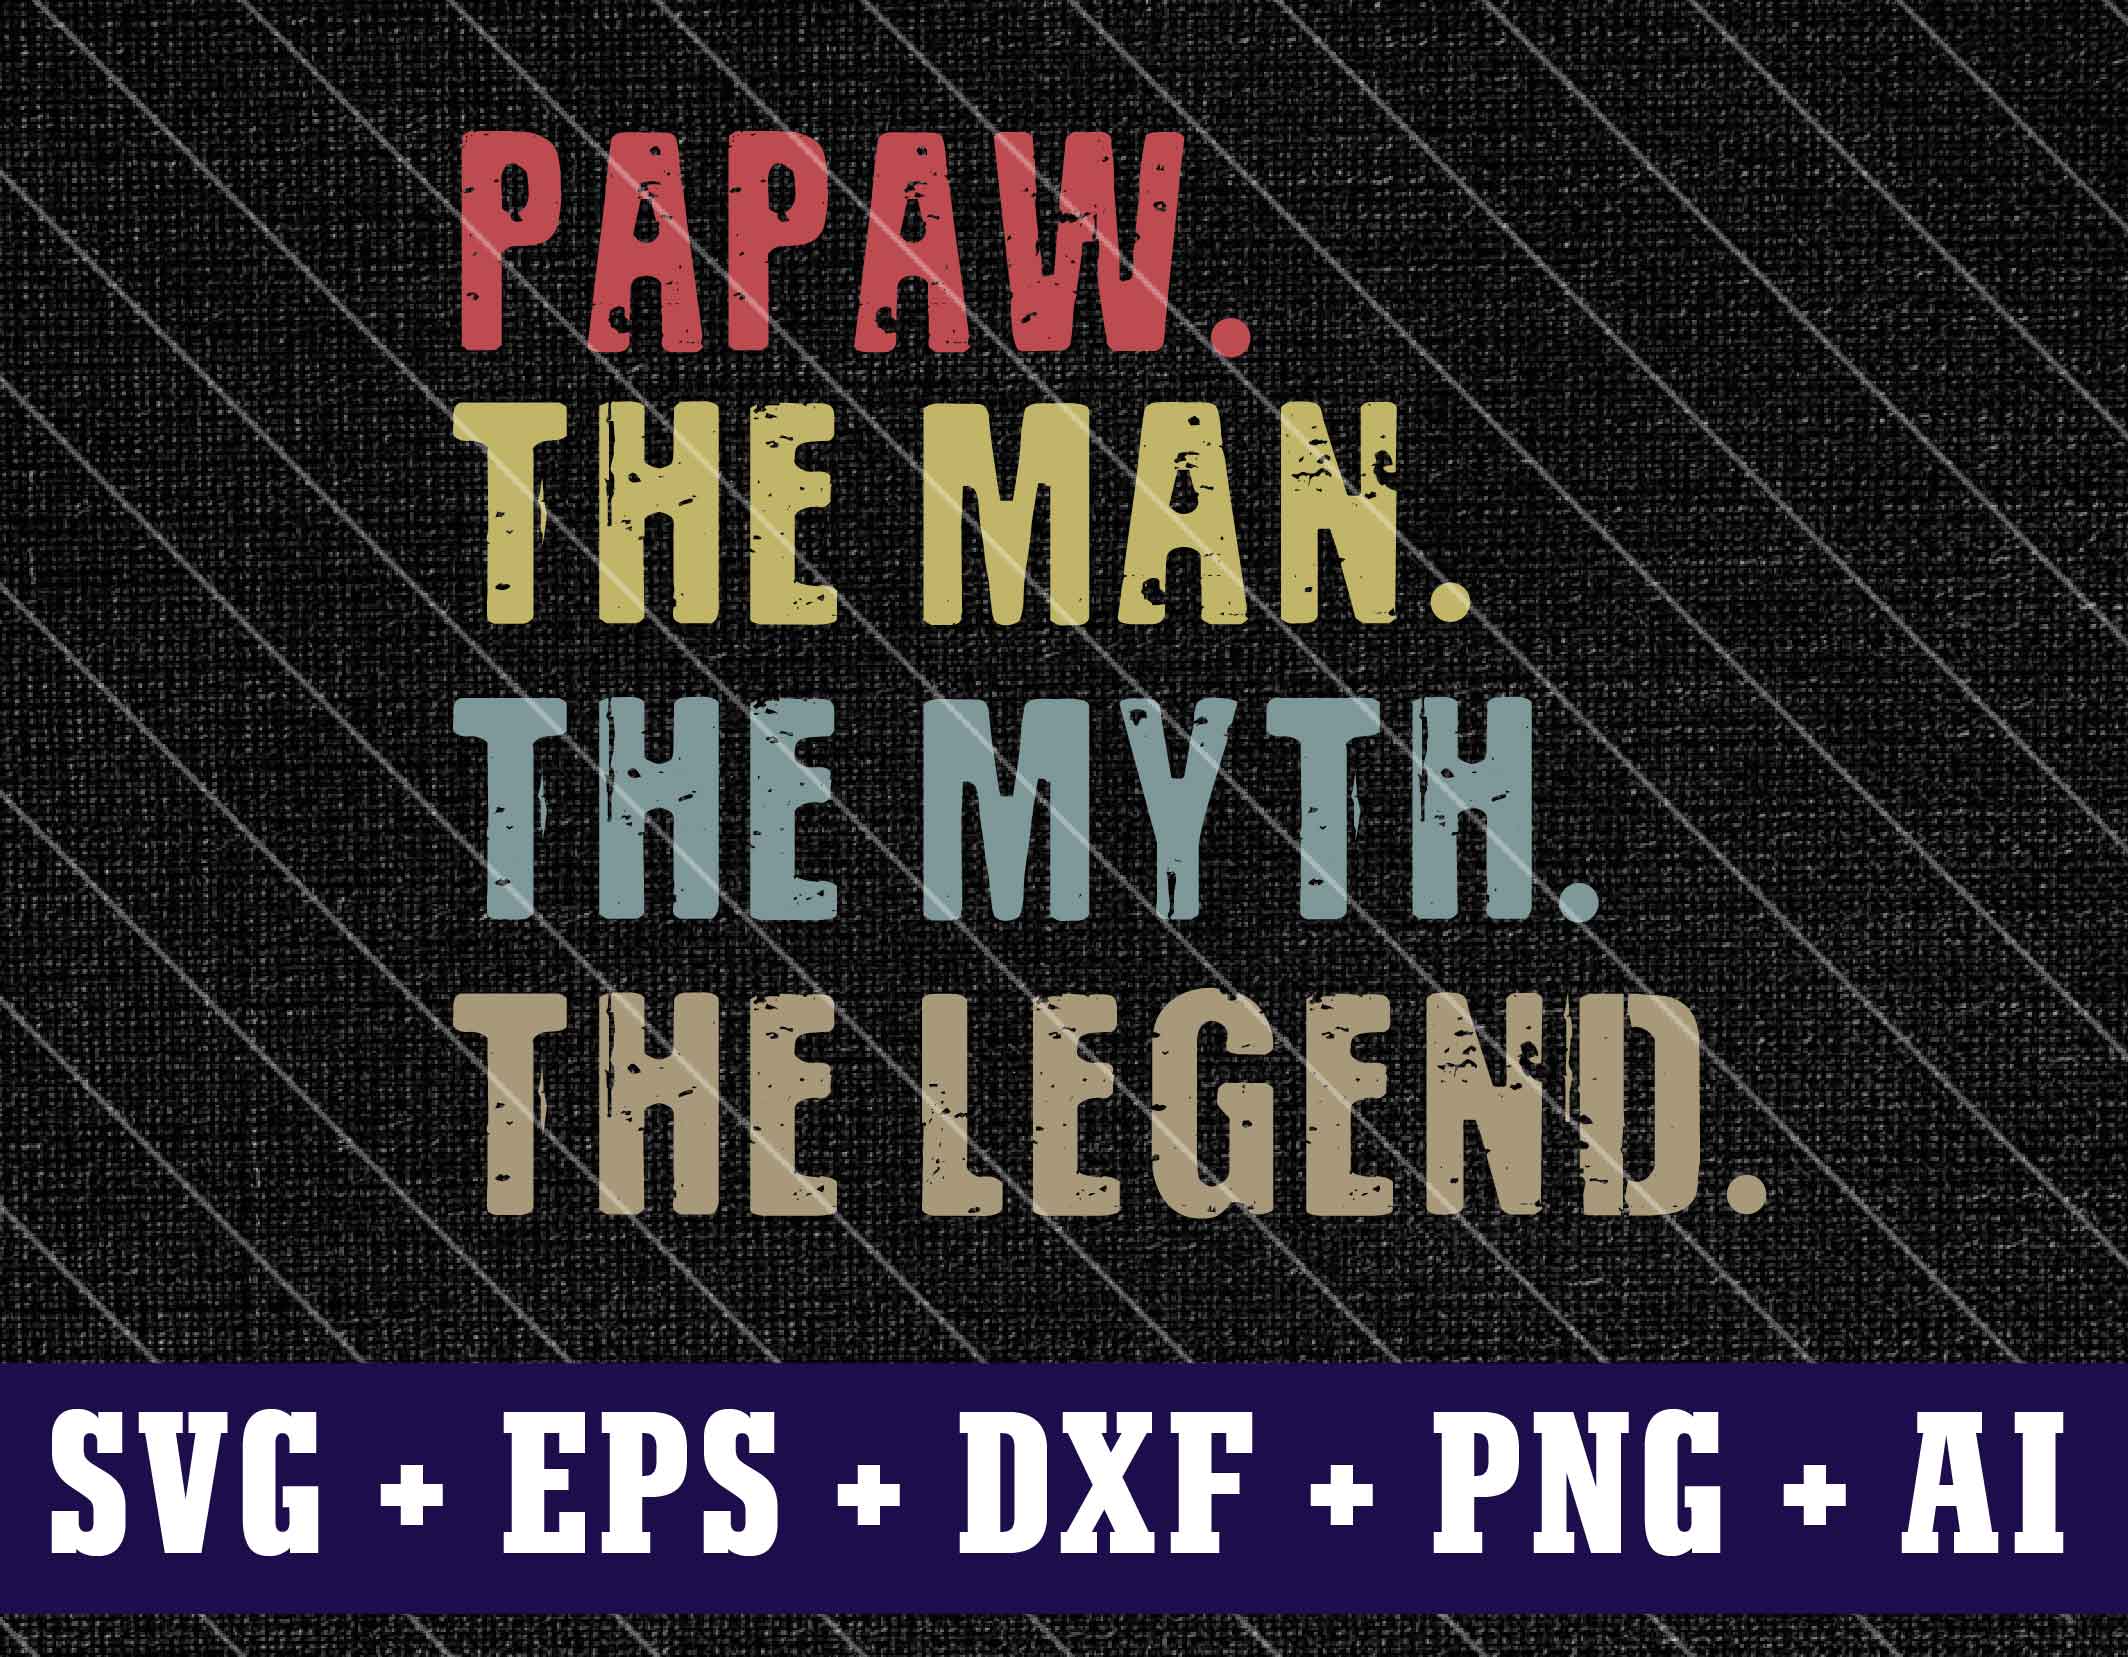 c722 01 Daddy SvG, Papaw The Man The Myth The Legend SvG, Father, Grandfather, Distressed, Vintage, Vector, Shirt Design, Cricut, Instant Download